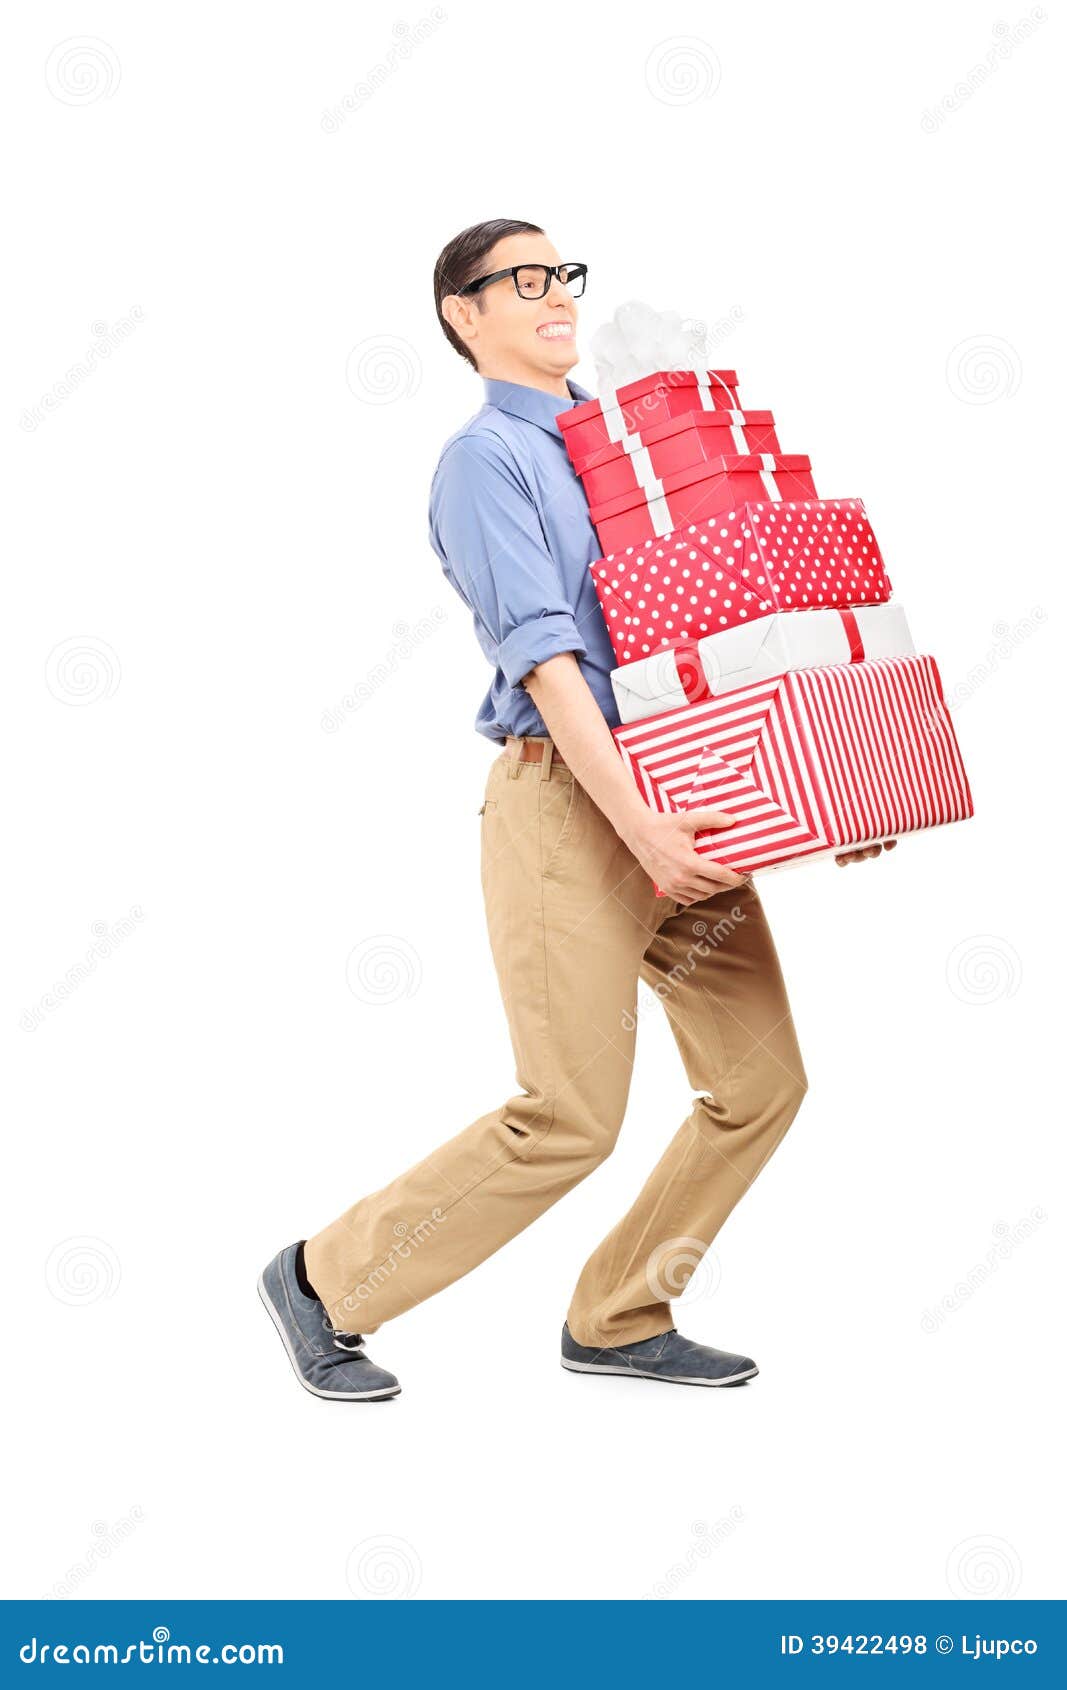 clipart man carrying heavy load - photo #12